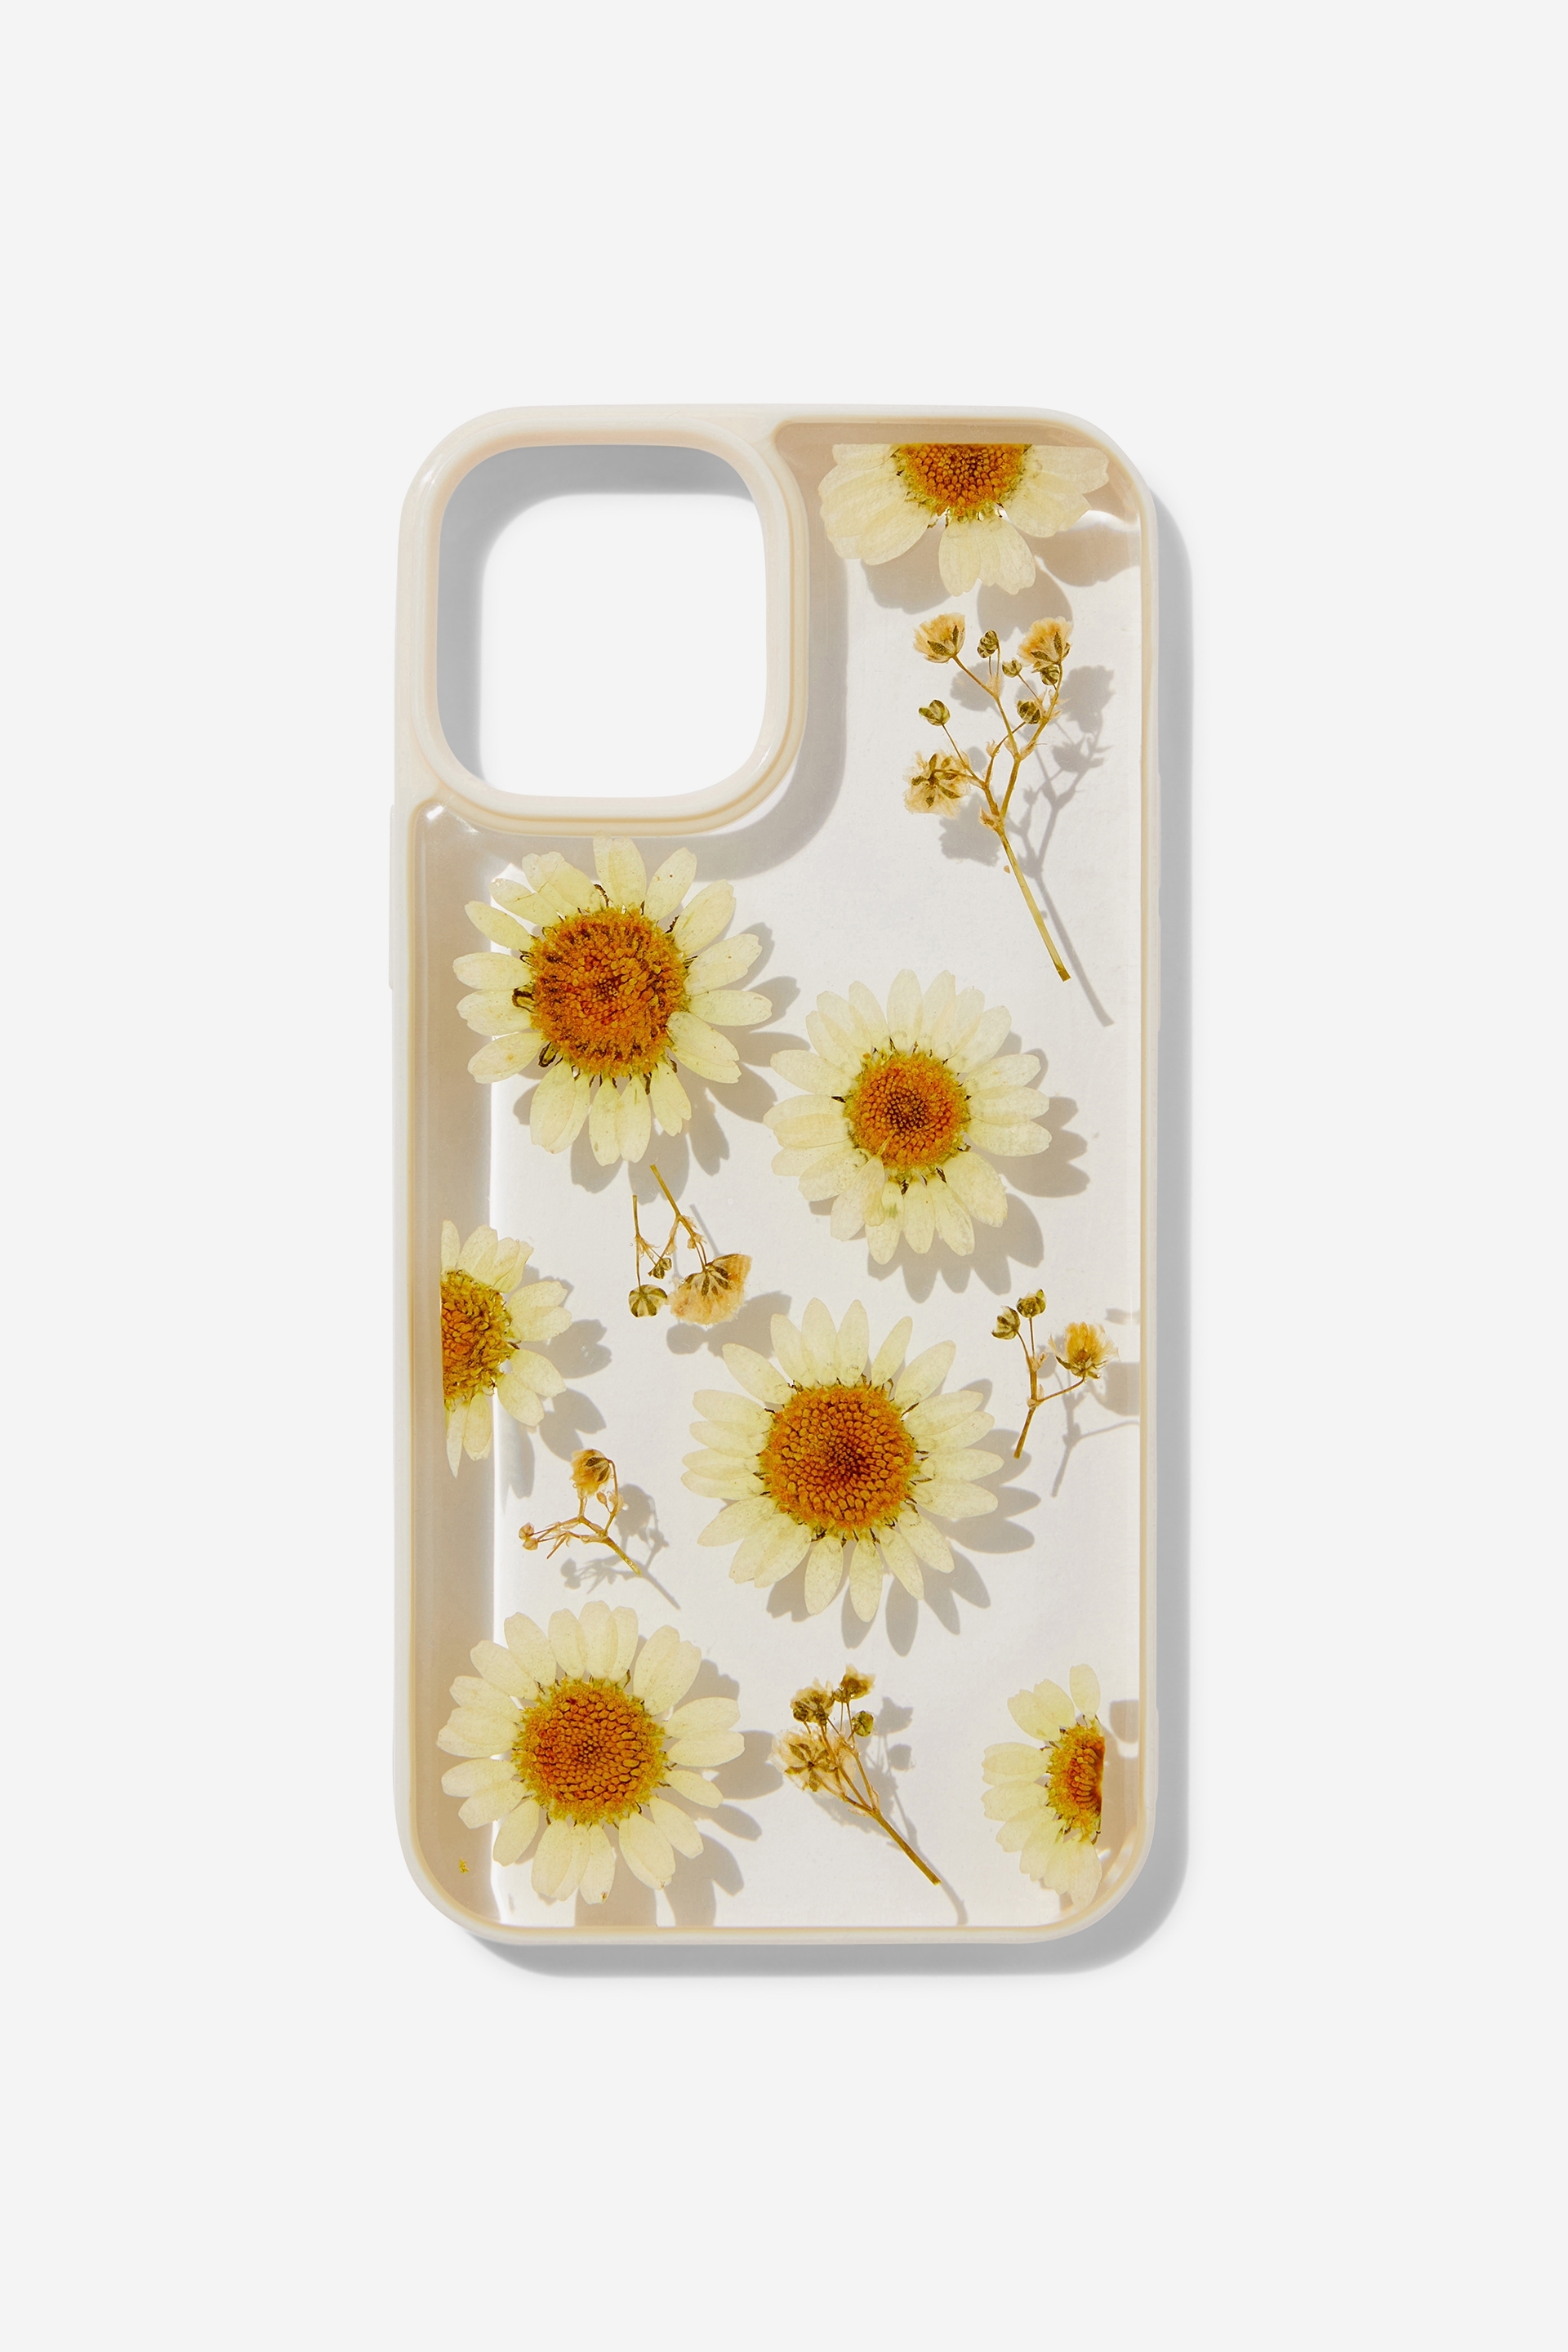 Typo - Protective Phone Case Iphone 12, 12 Pro - Trapped daisy / ecru